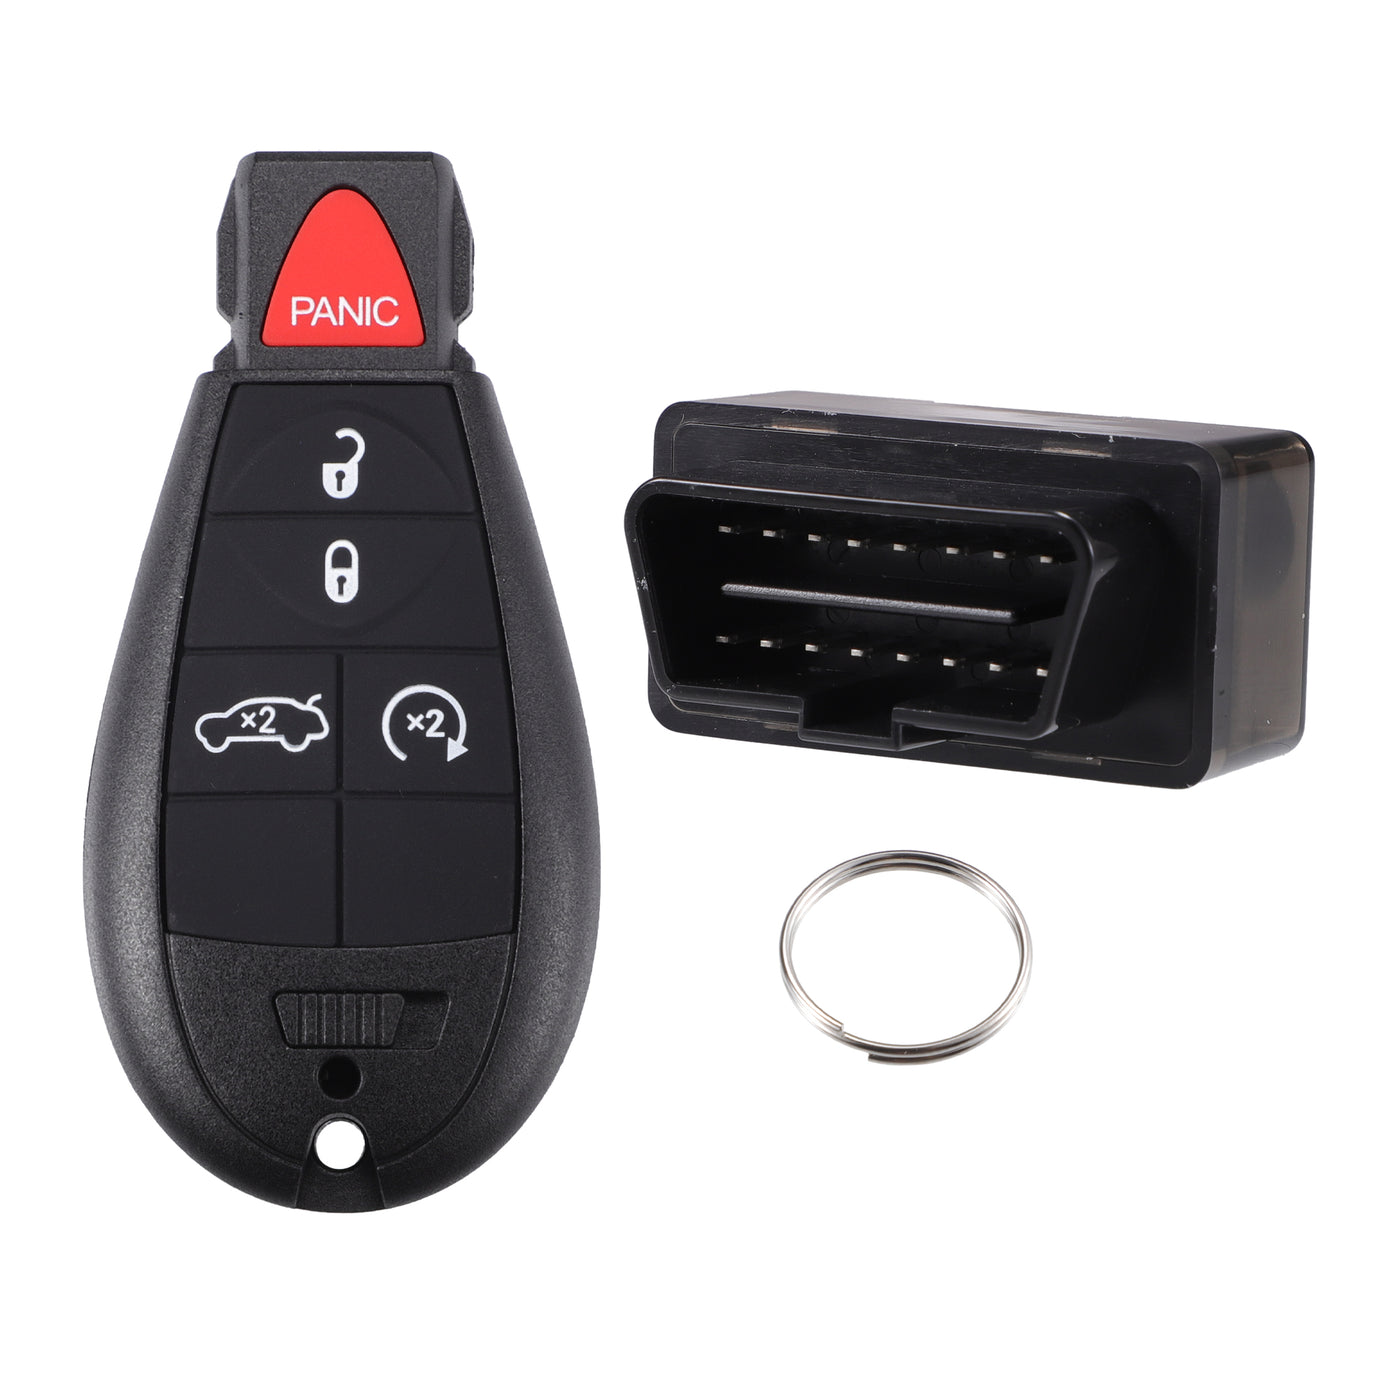 X AUTOHAUX Key Programmer with Keyless Entry Remote Key Fob Replacement for Dodge Challenger Charger 08-12 for Jeep Grand Cherokee 11-13 M3N5WY783X 433Mhz with Chip 5 Button OBD2 Tool